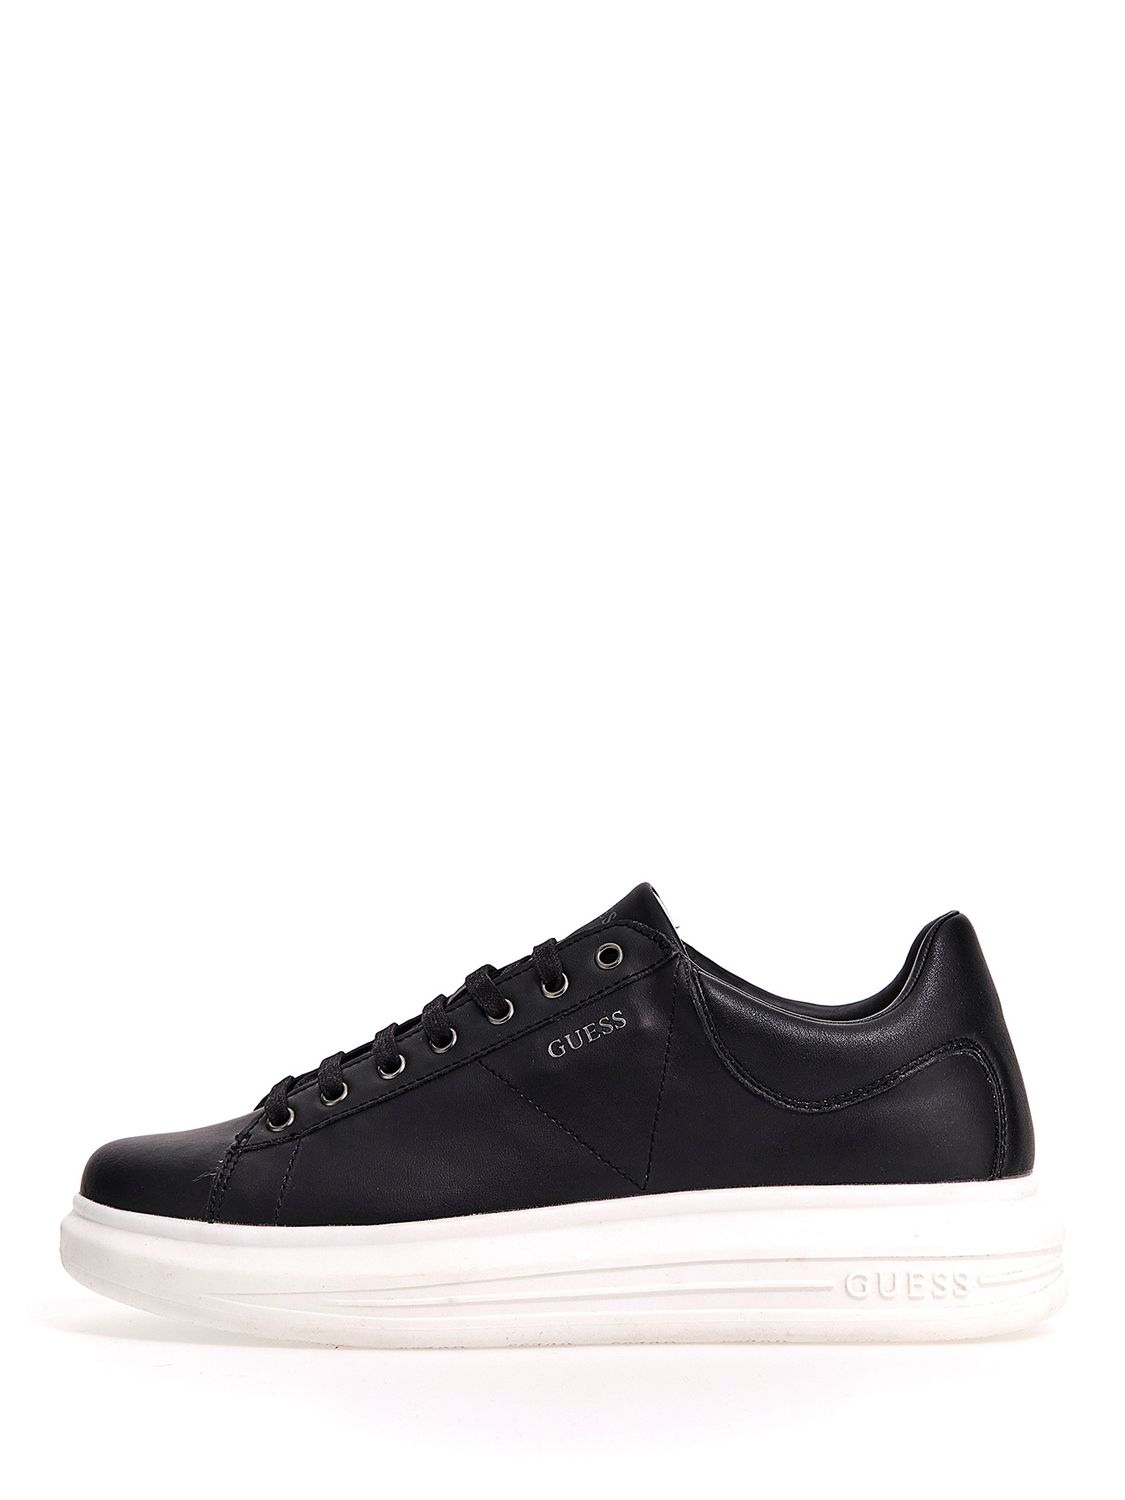 GUESS Vibo Mixed Leather Trainers, Black, 7